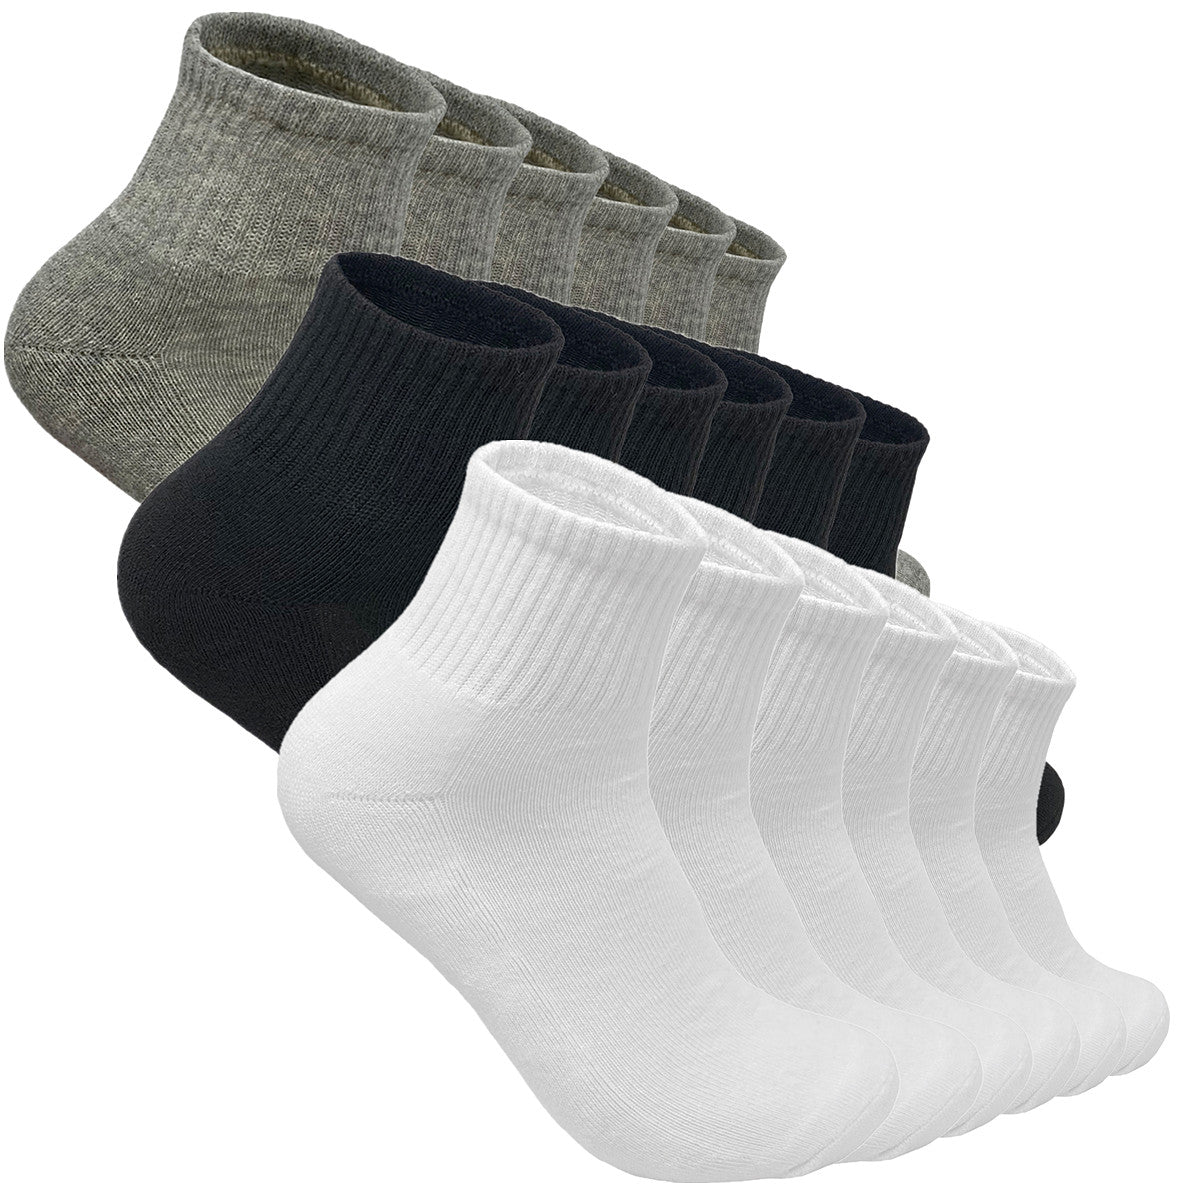 Men's 12 Pairs Cotton Solid Athletic Ankle Quarter Socks with